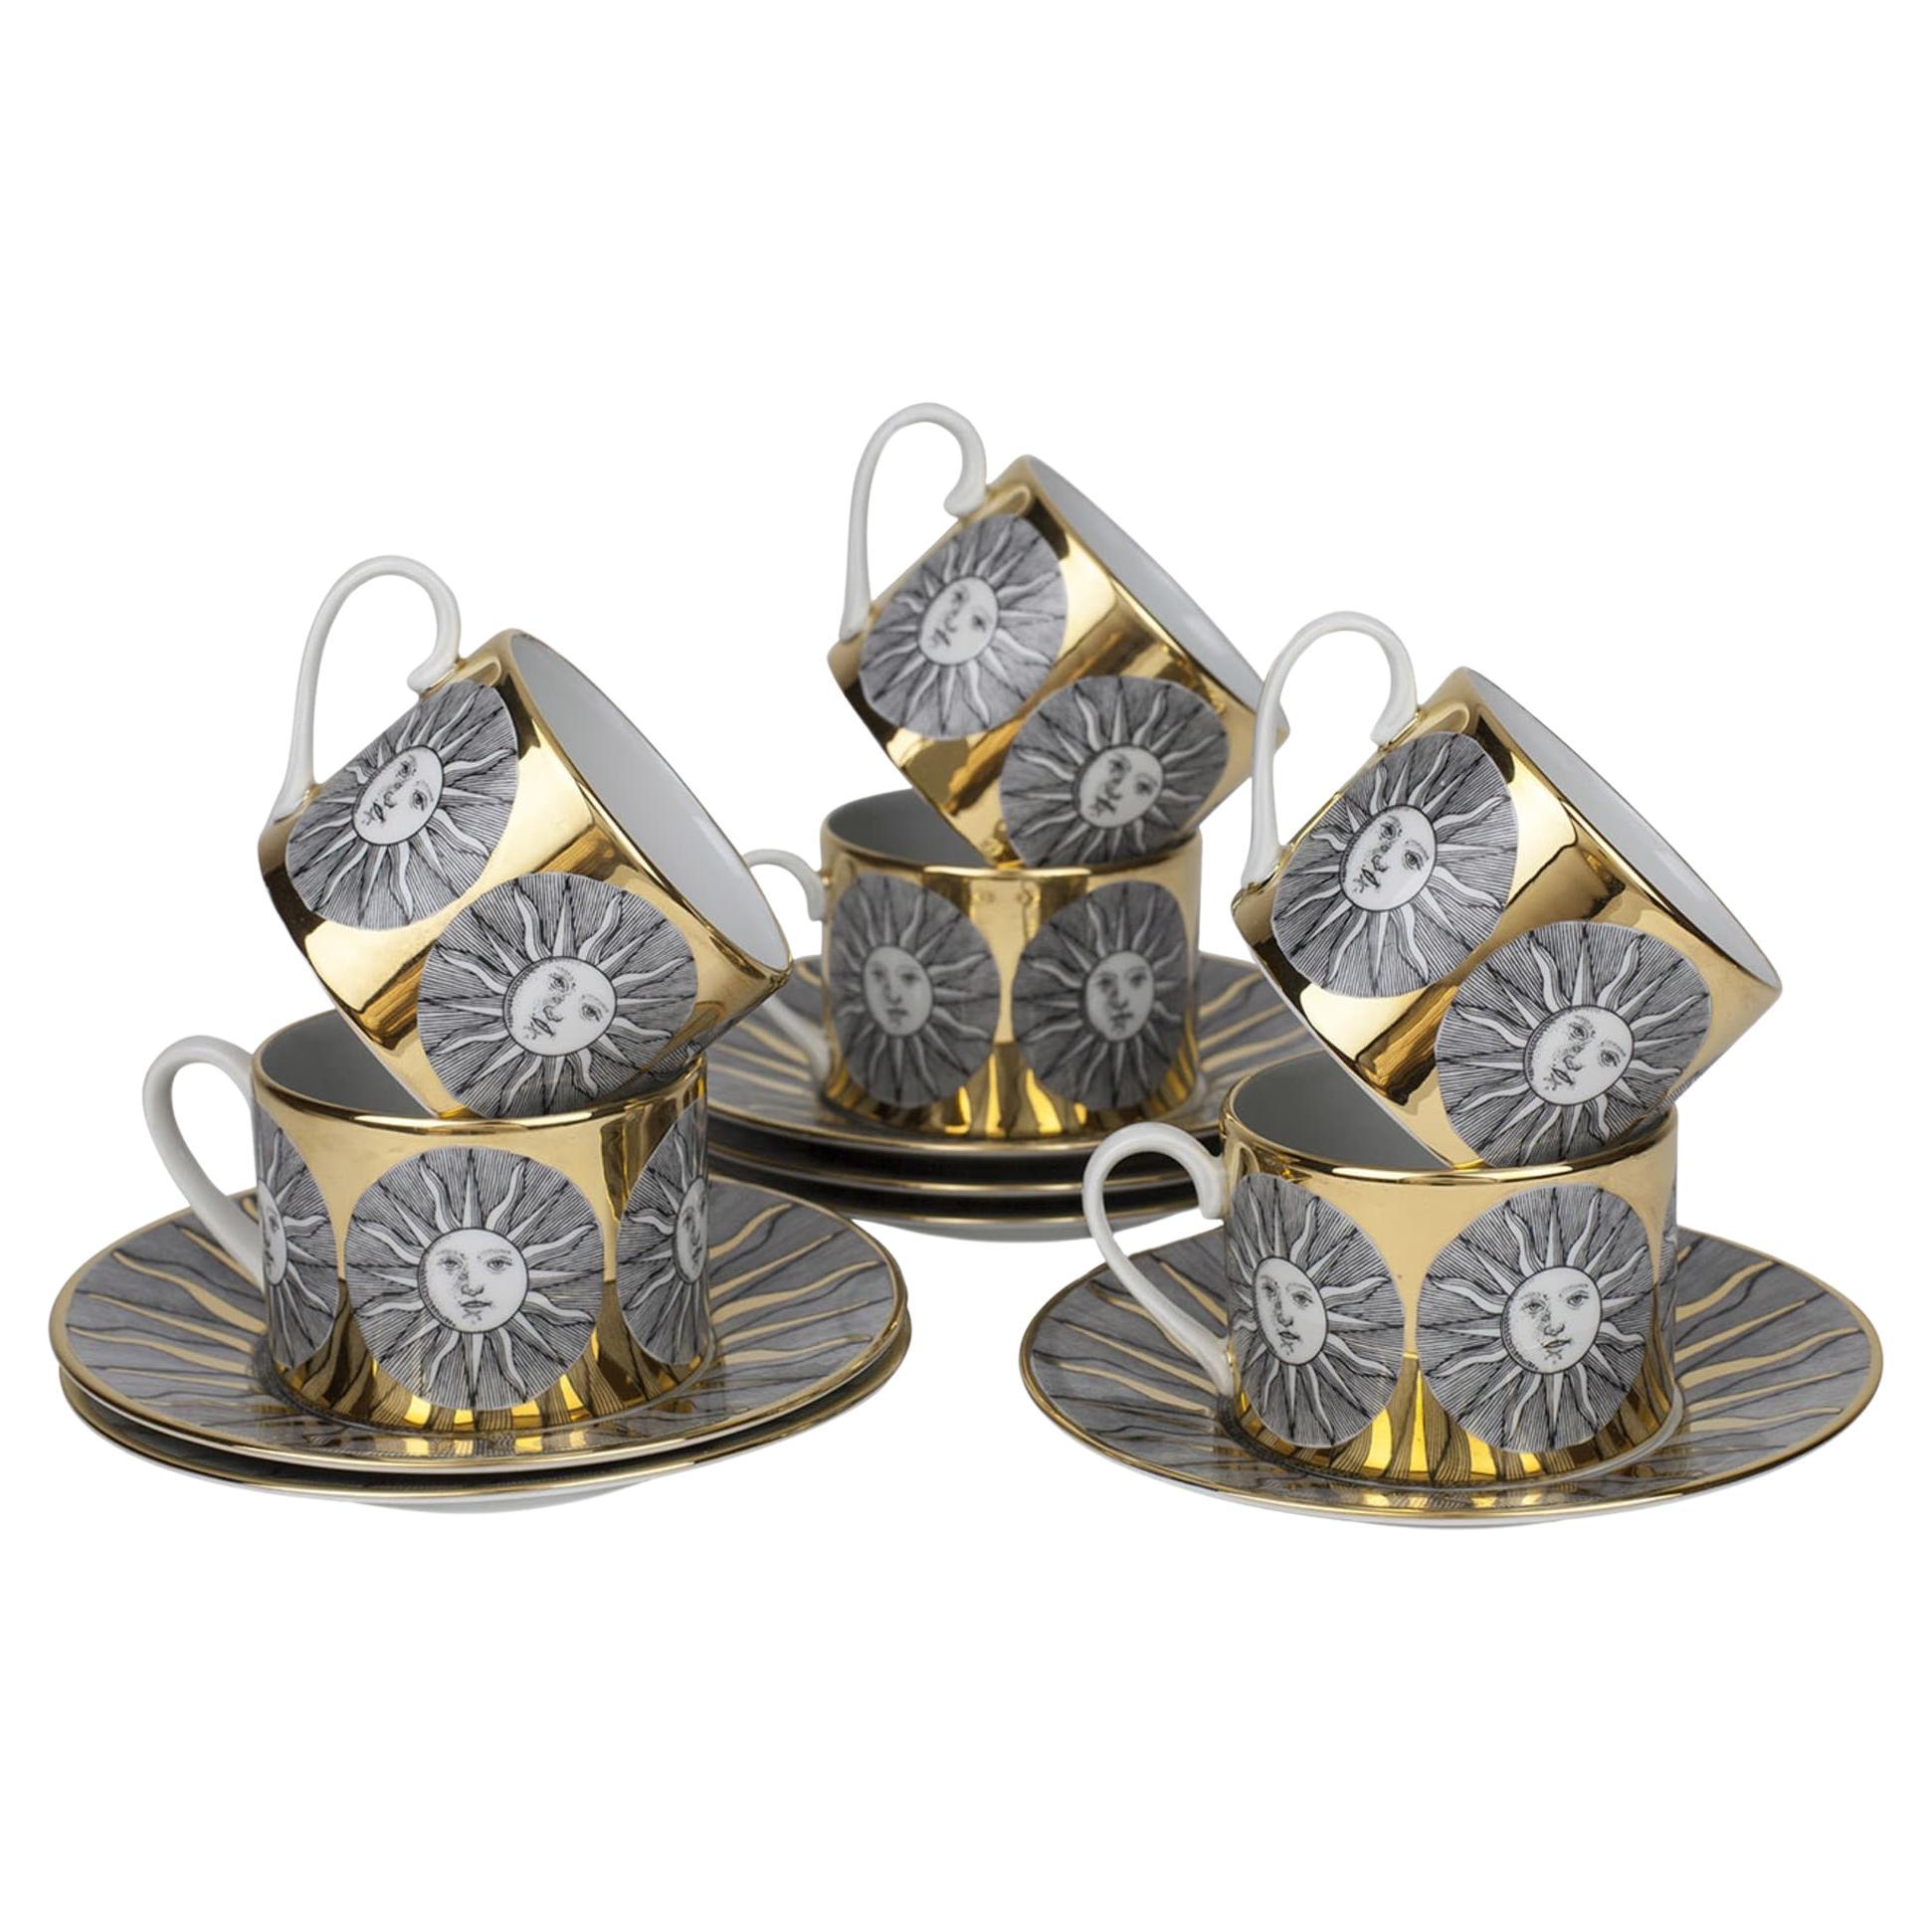 Set of 6 Sole Tea Cups For Sale